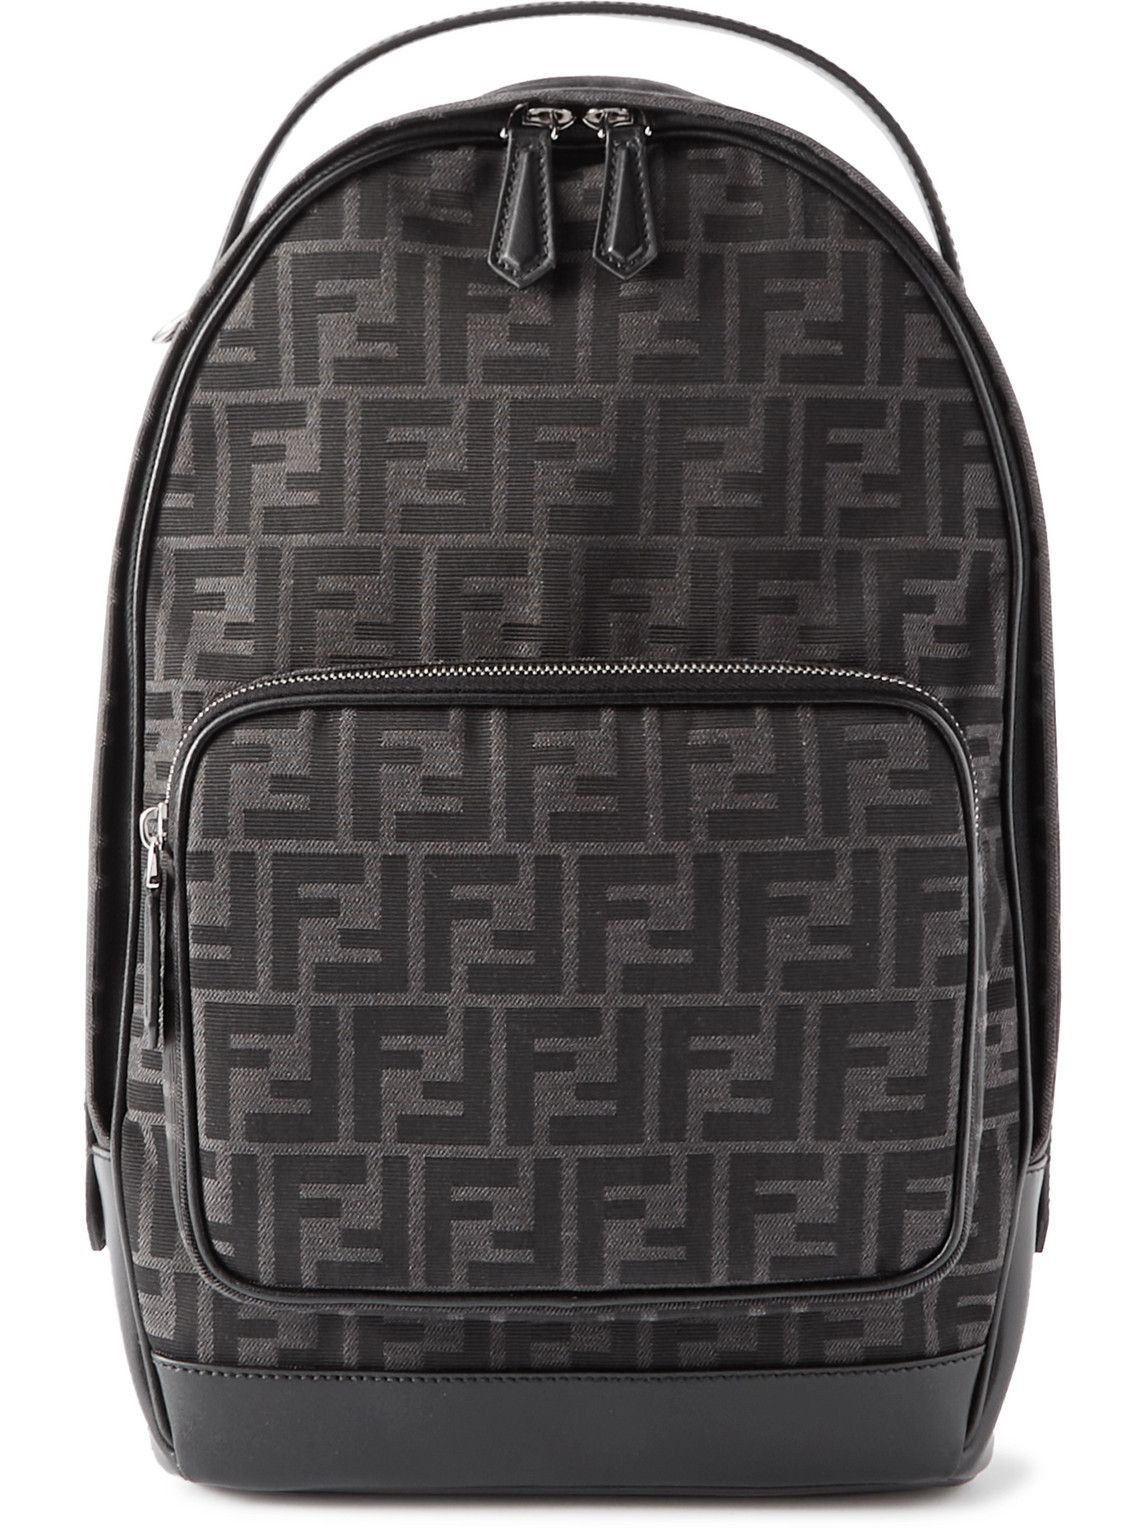 FENDI Women's Backpack Leather in Black | Second Hand